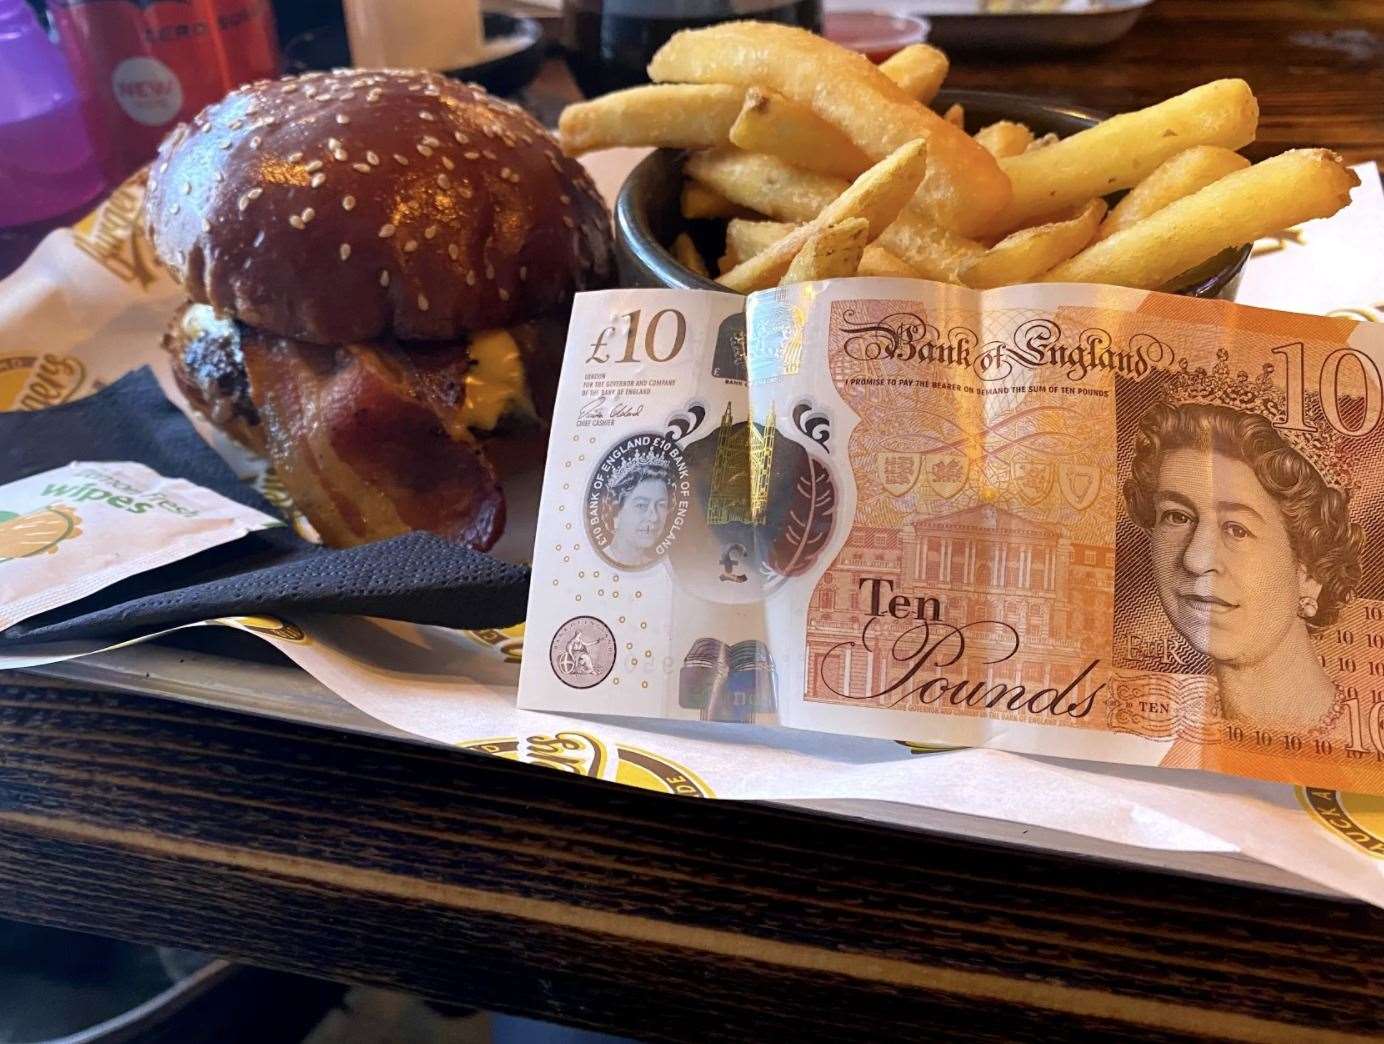 I could pay for my lunch in cash, although a card machine was offered first